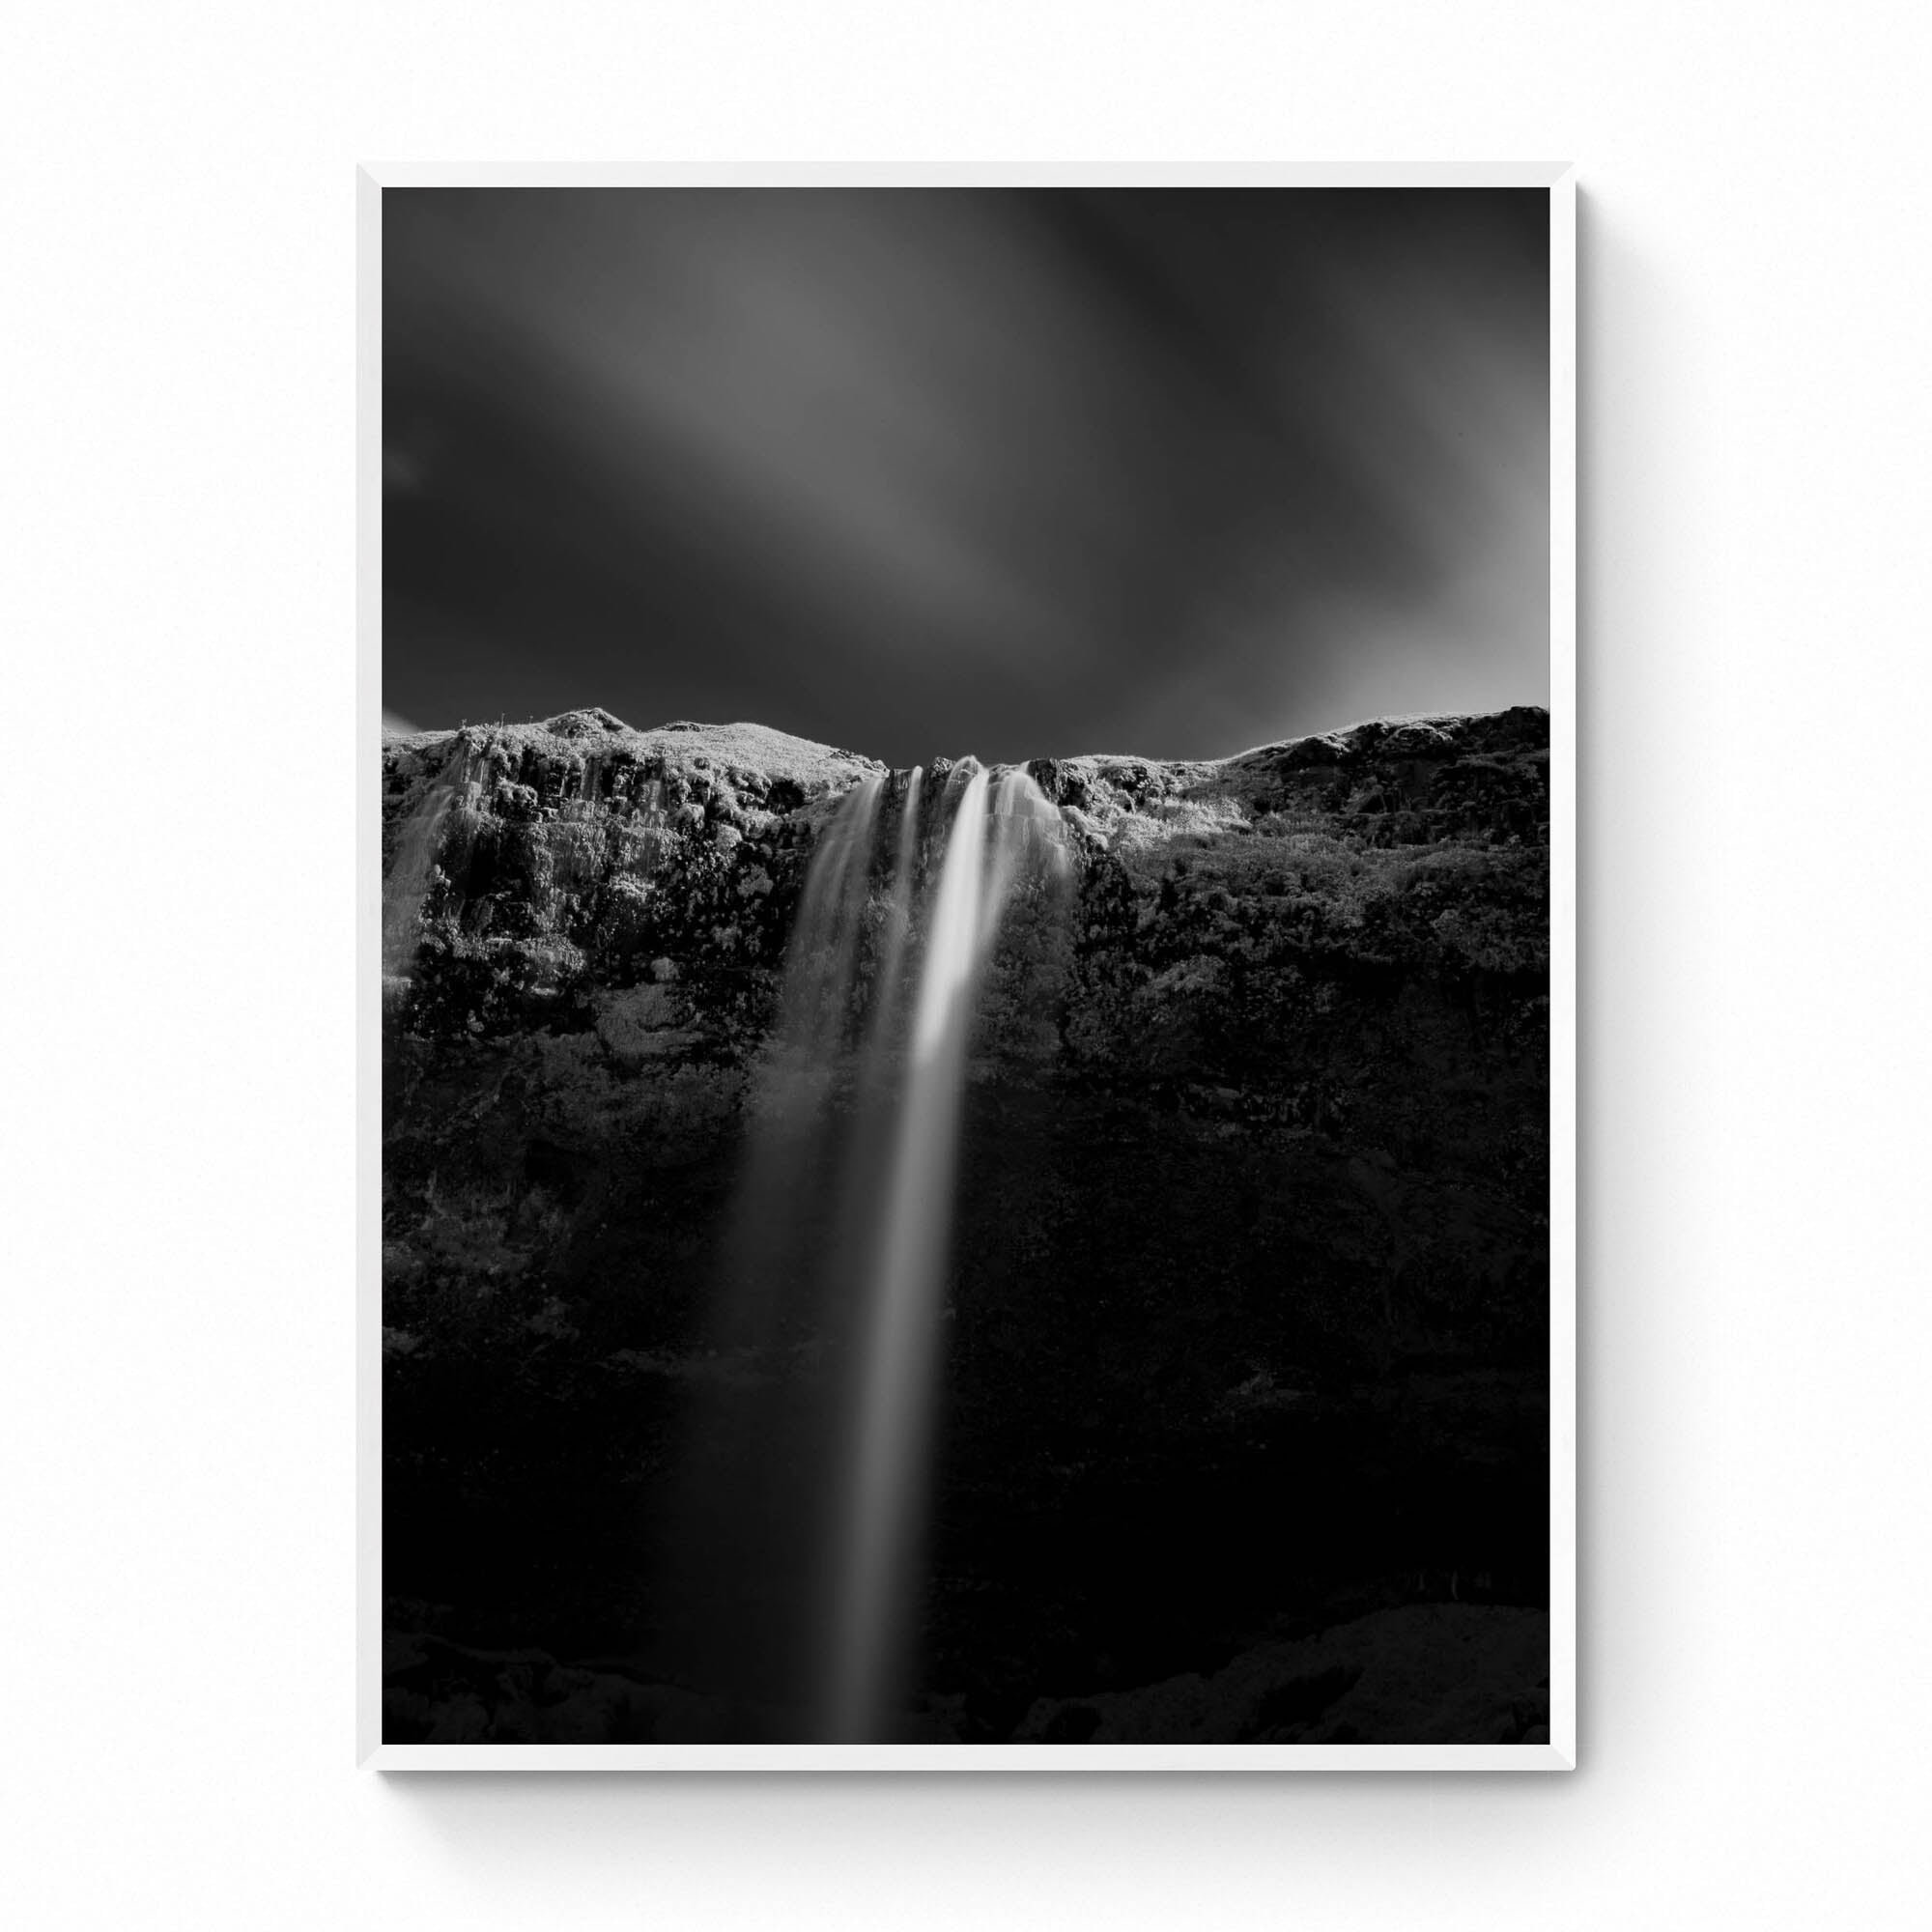 A black and white long-exposure photograph of Seljalandsfoss waterfall in Iceland, showing smooth water streams against a dark, textured cliff.